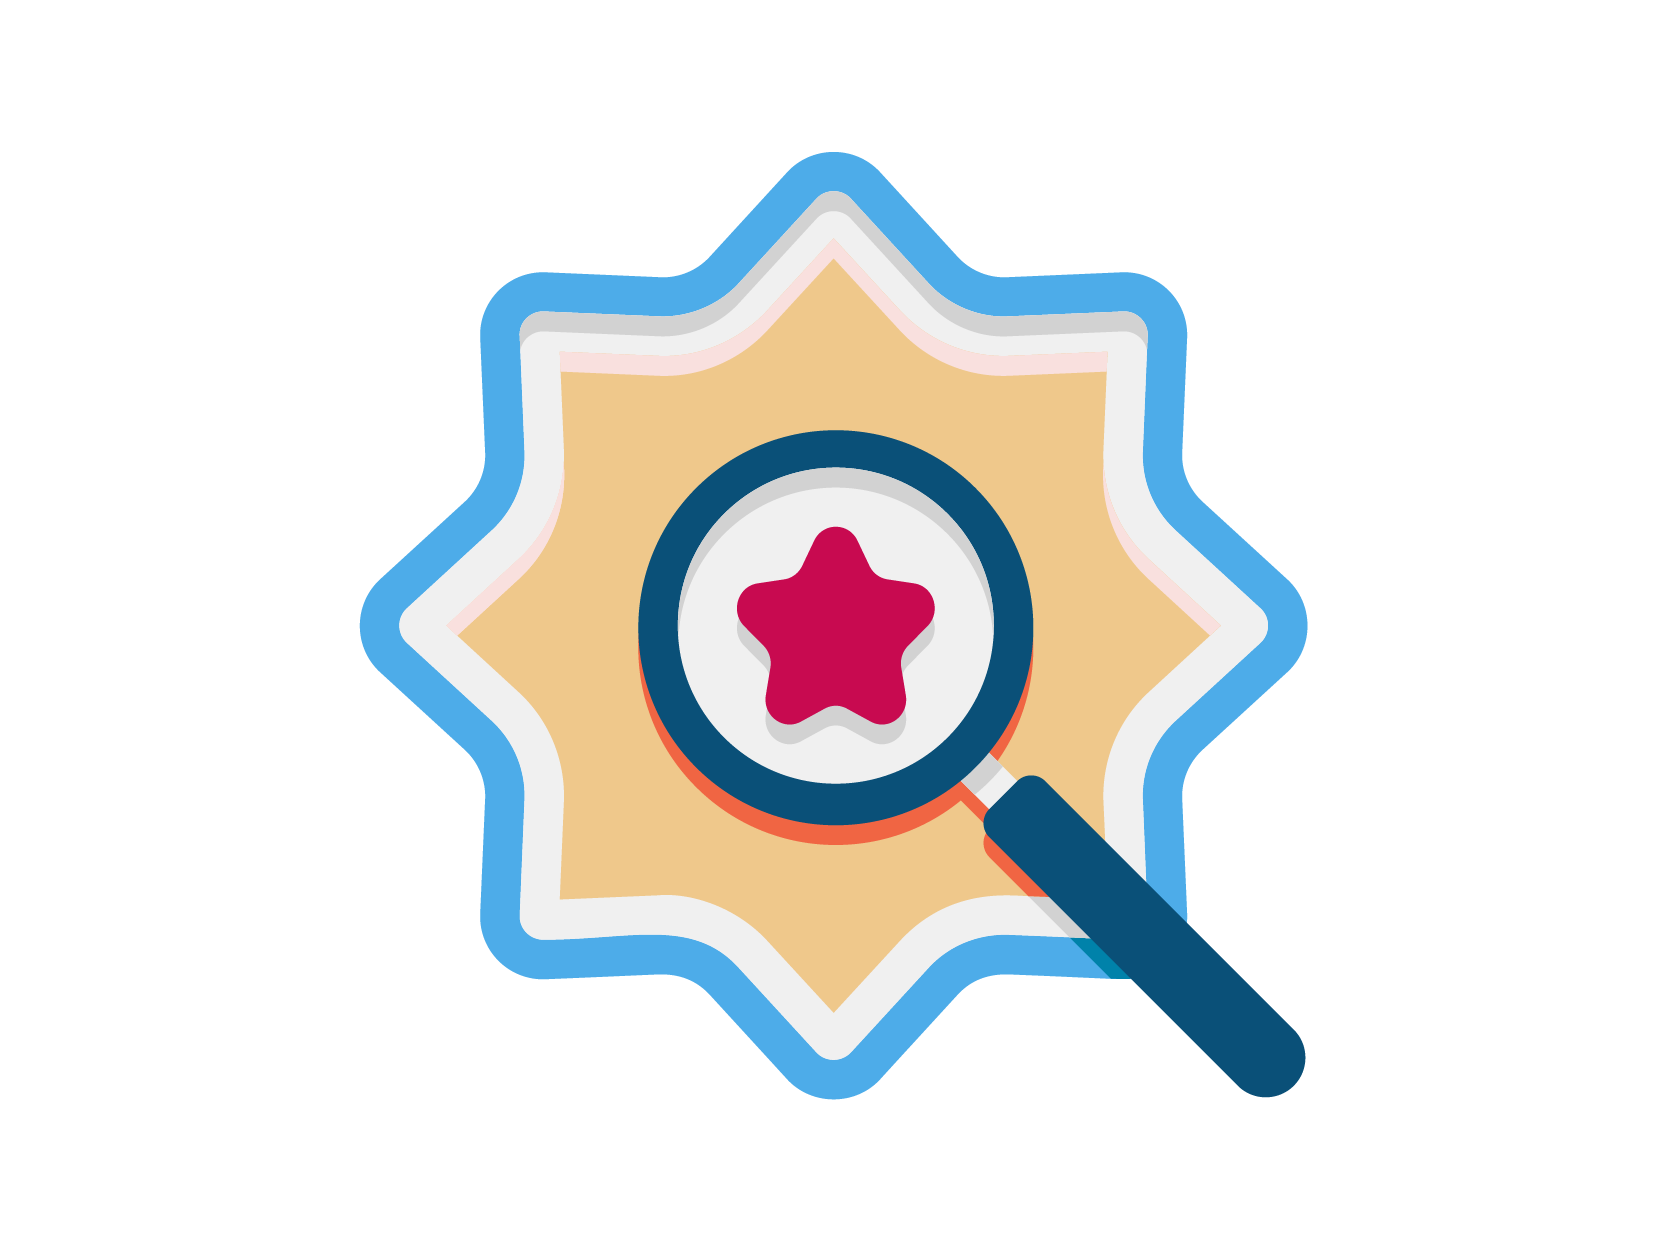 Magnifying glass with red star in the center